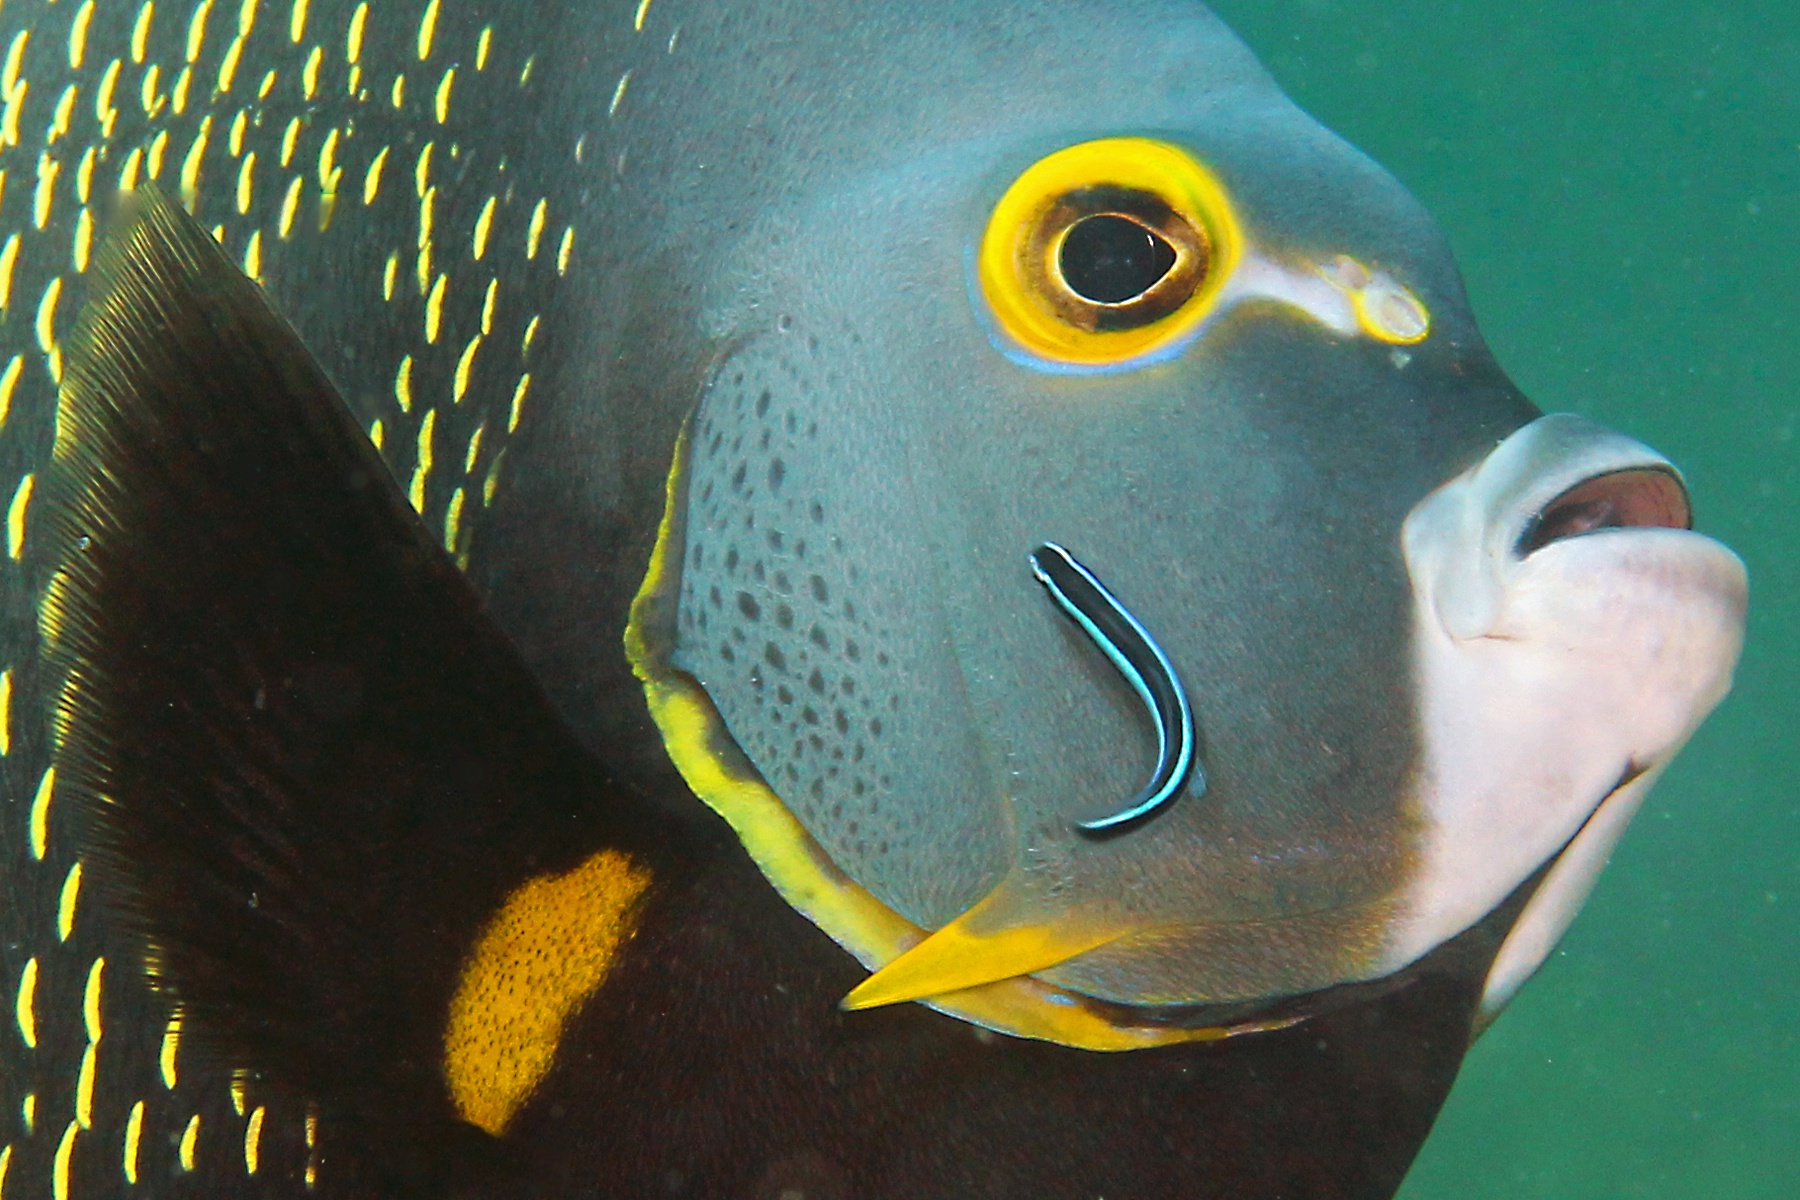 French Angelfish with vibrant yellow markings